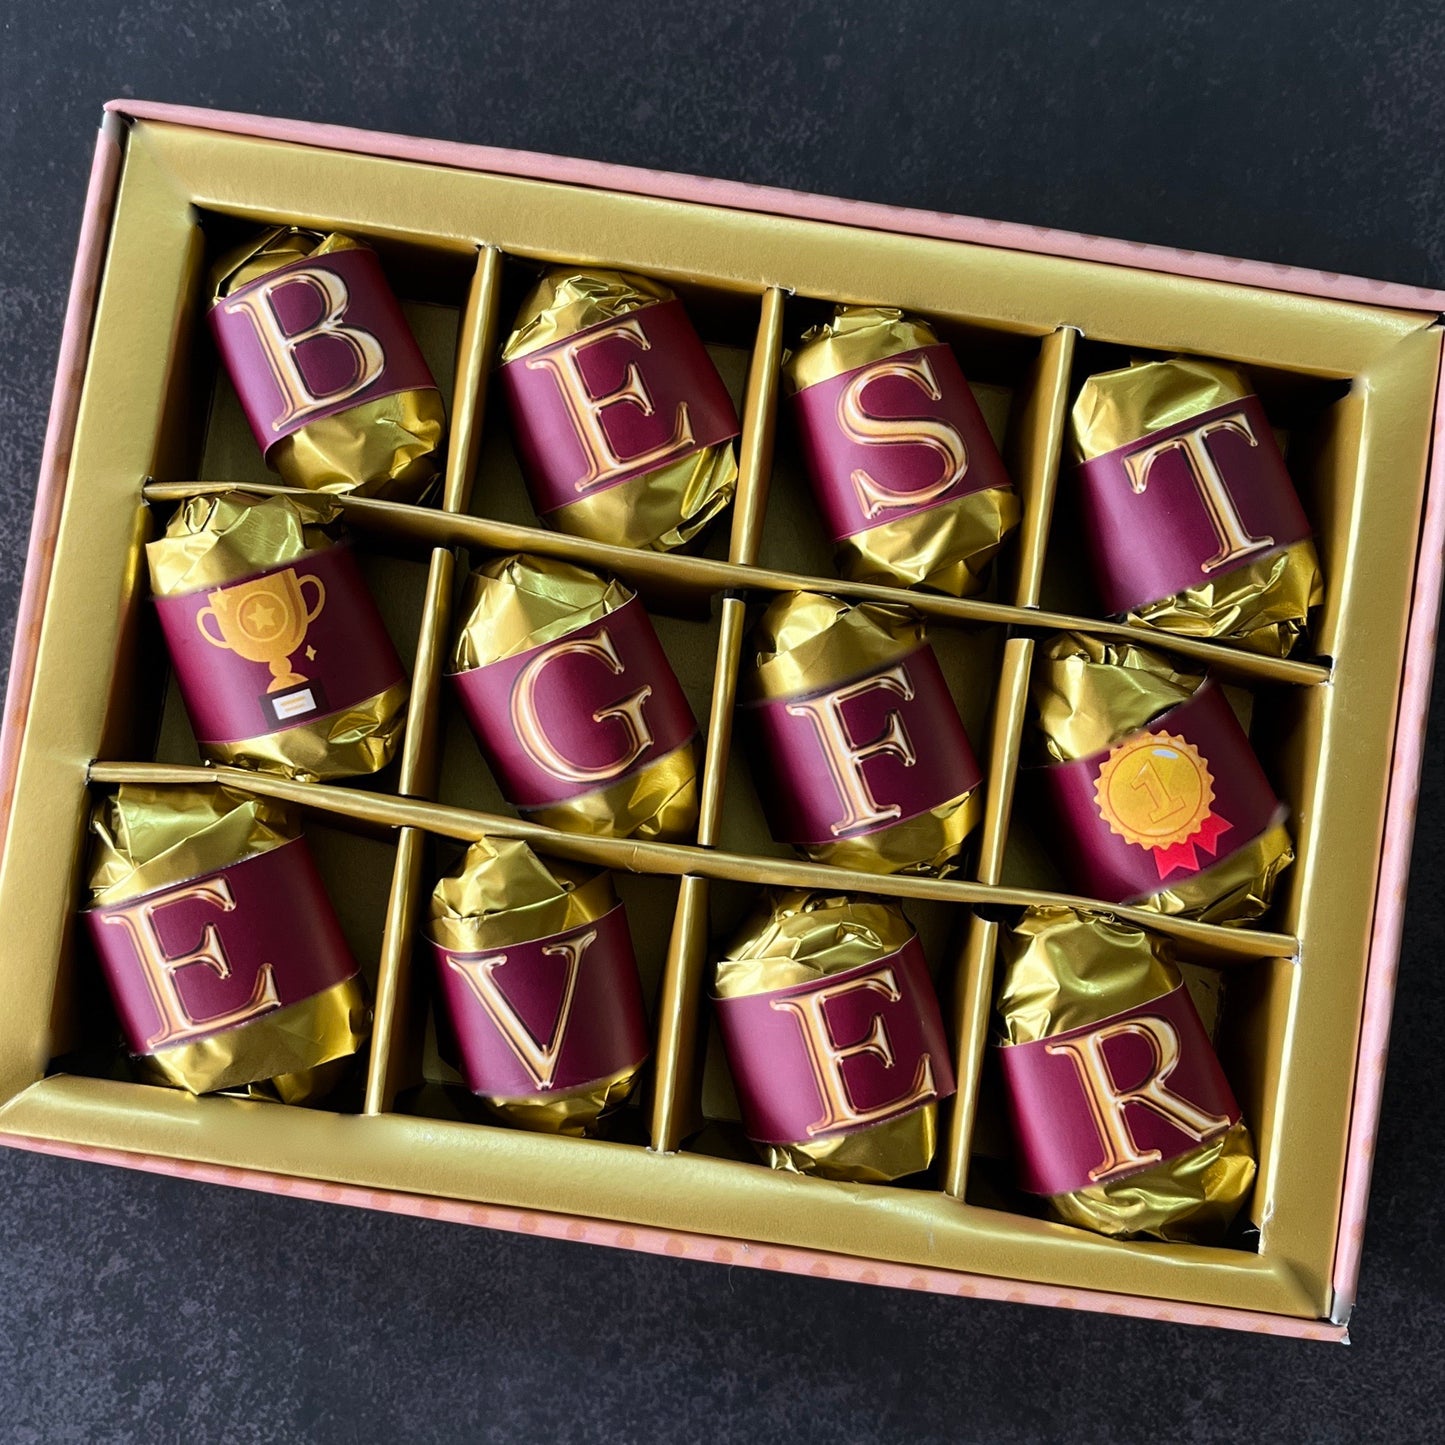 Best Girlfriend Ever - Valentine's Day Chocolate Gift Box - Almond and Chocolate Dates - 12 Pieces